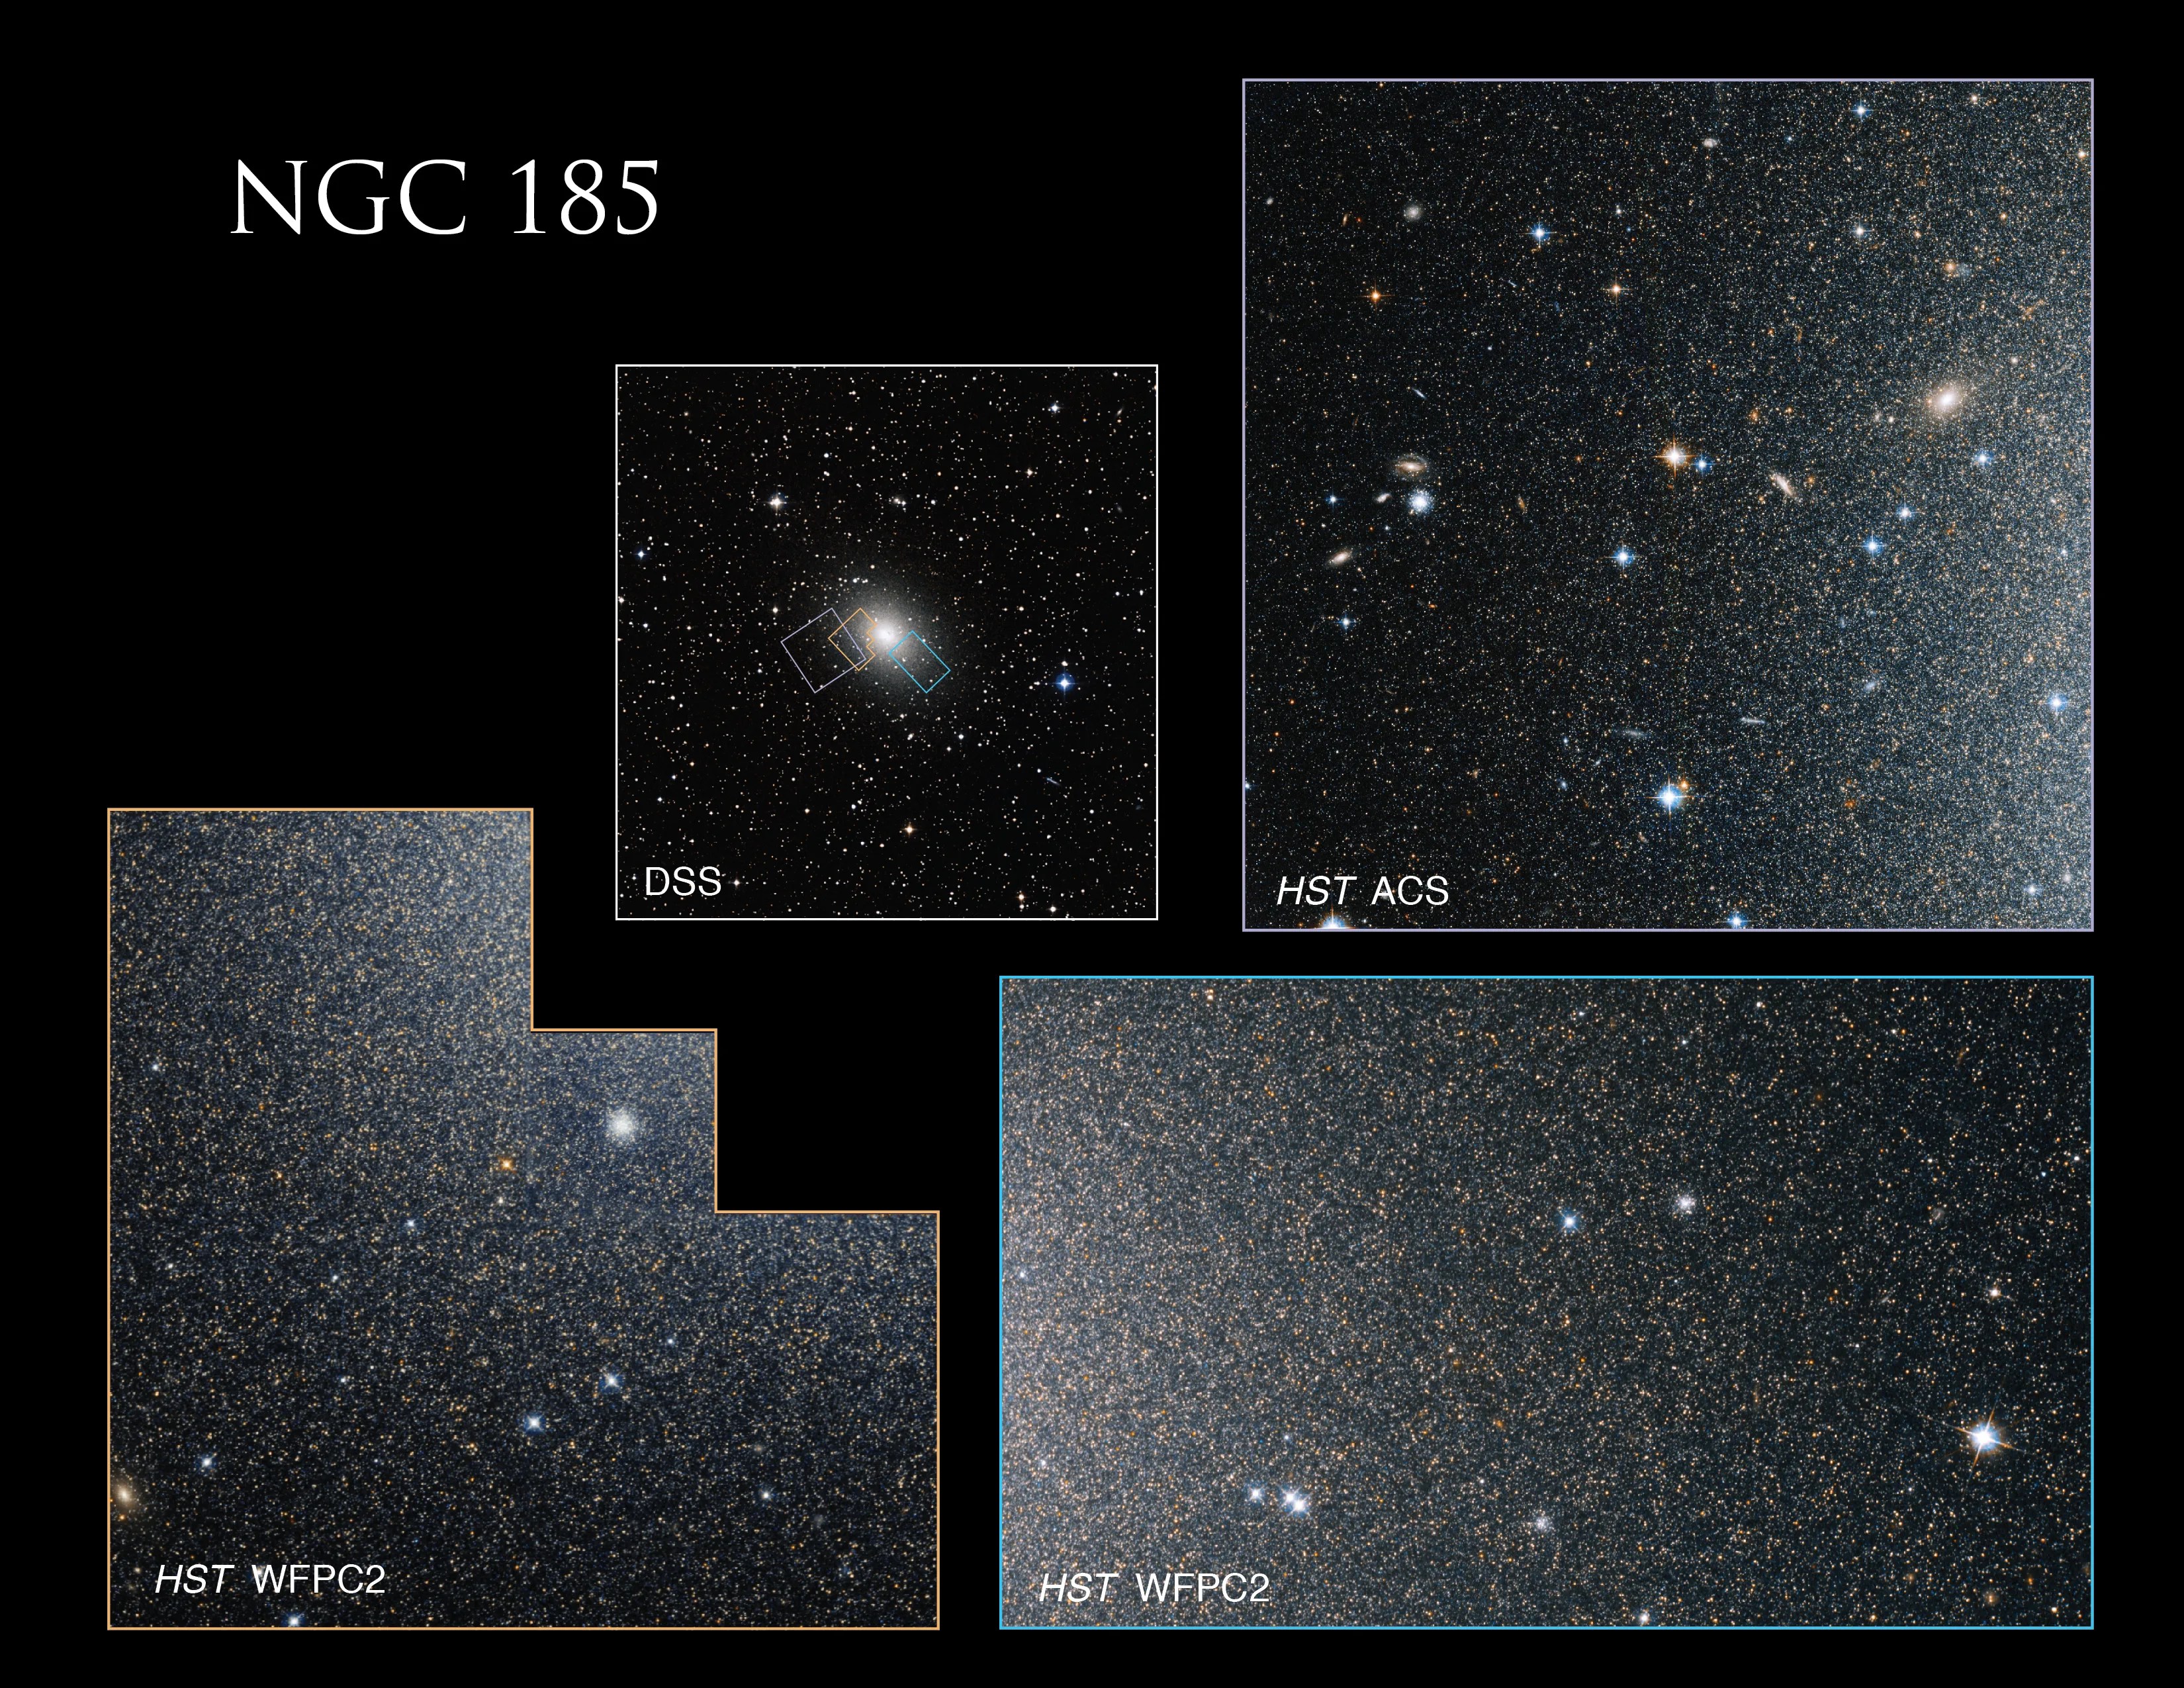 The ground-based image of Caldwell 18 (NGC 185) in the top left is from the Digitized Sky Survey (DSS) and shows the sites of some additional Hubble observations of the galaxy. The image in the upper right is a composite of observations taken by the Advanced Camera for Surveys (ACS), while the bottom two images are composites from the Wide Field and Planetary Camera 2 (WFPC2). Each Hubble image consists of observations taken in visible and infrared light